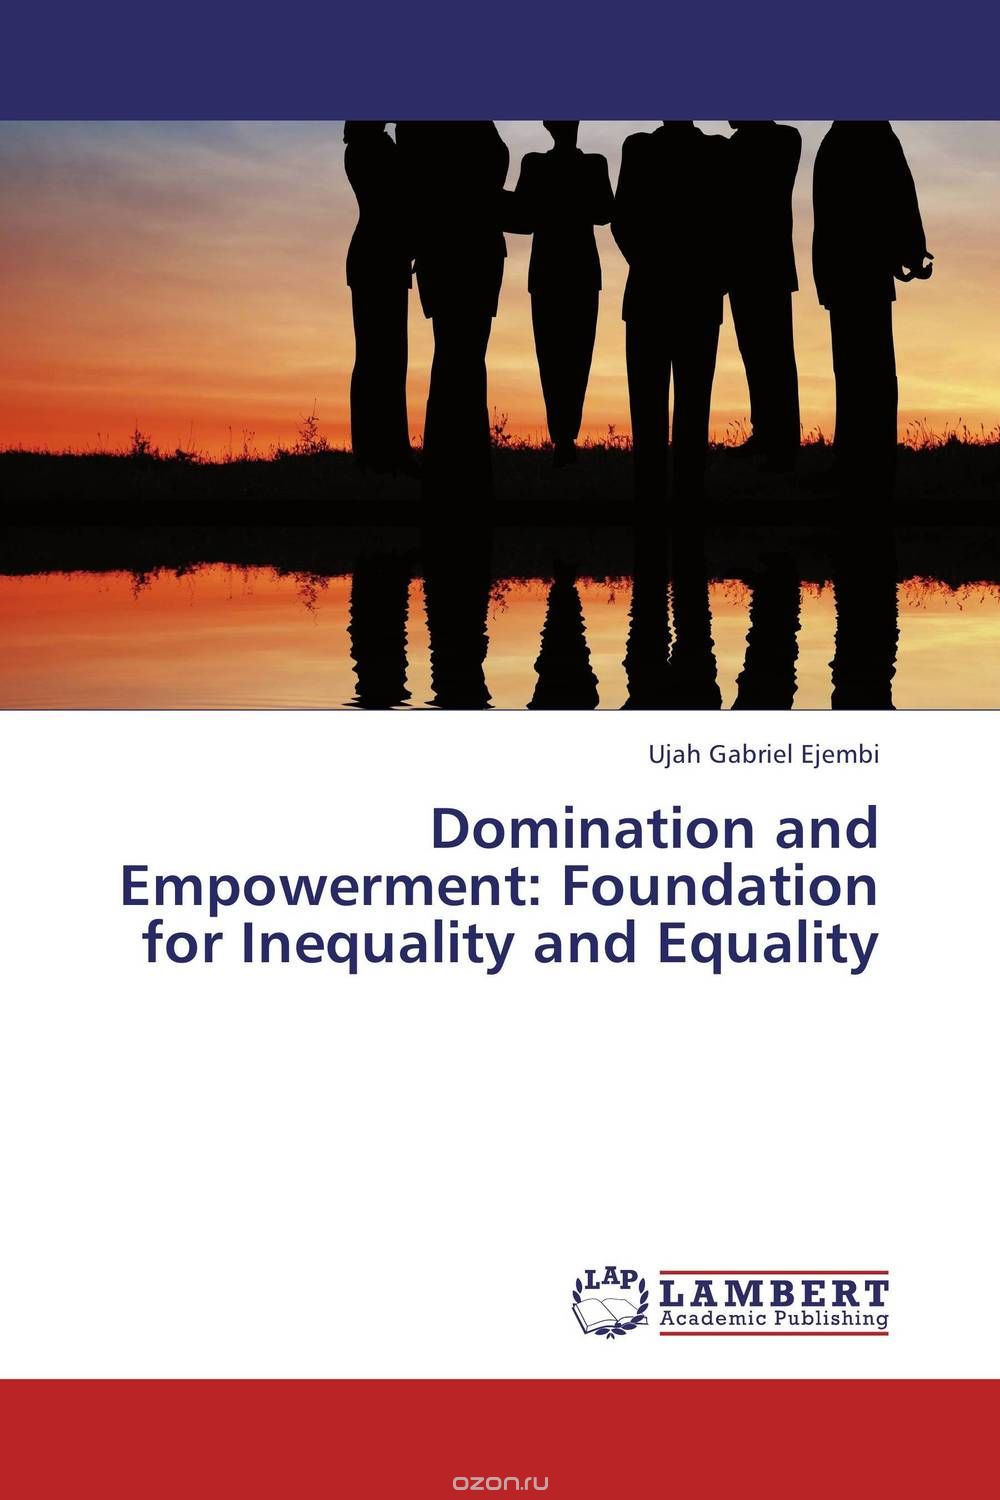 Скачать книгу "Domination and Empowerment: Foundation for Inequality and Equality"